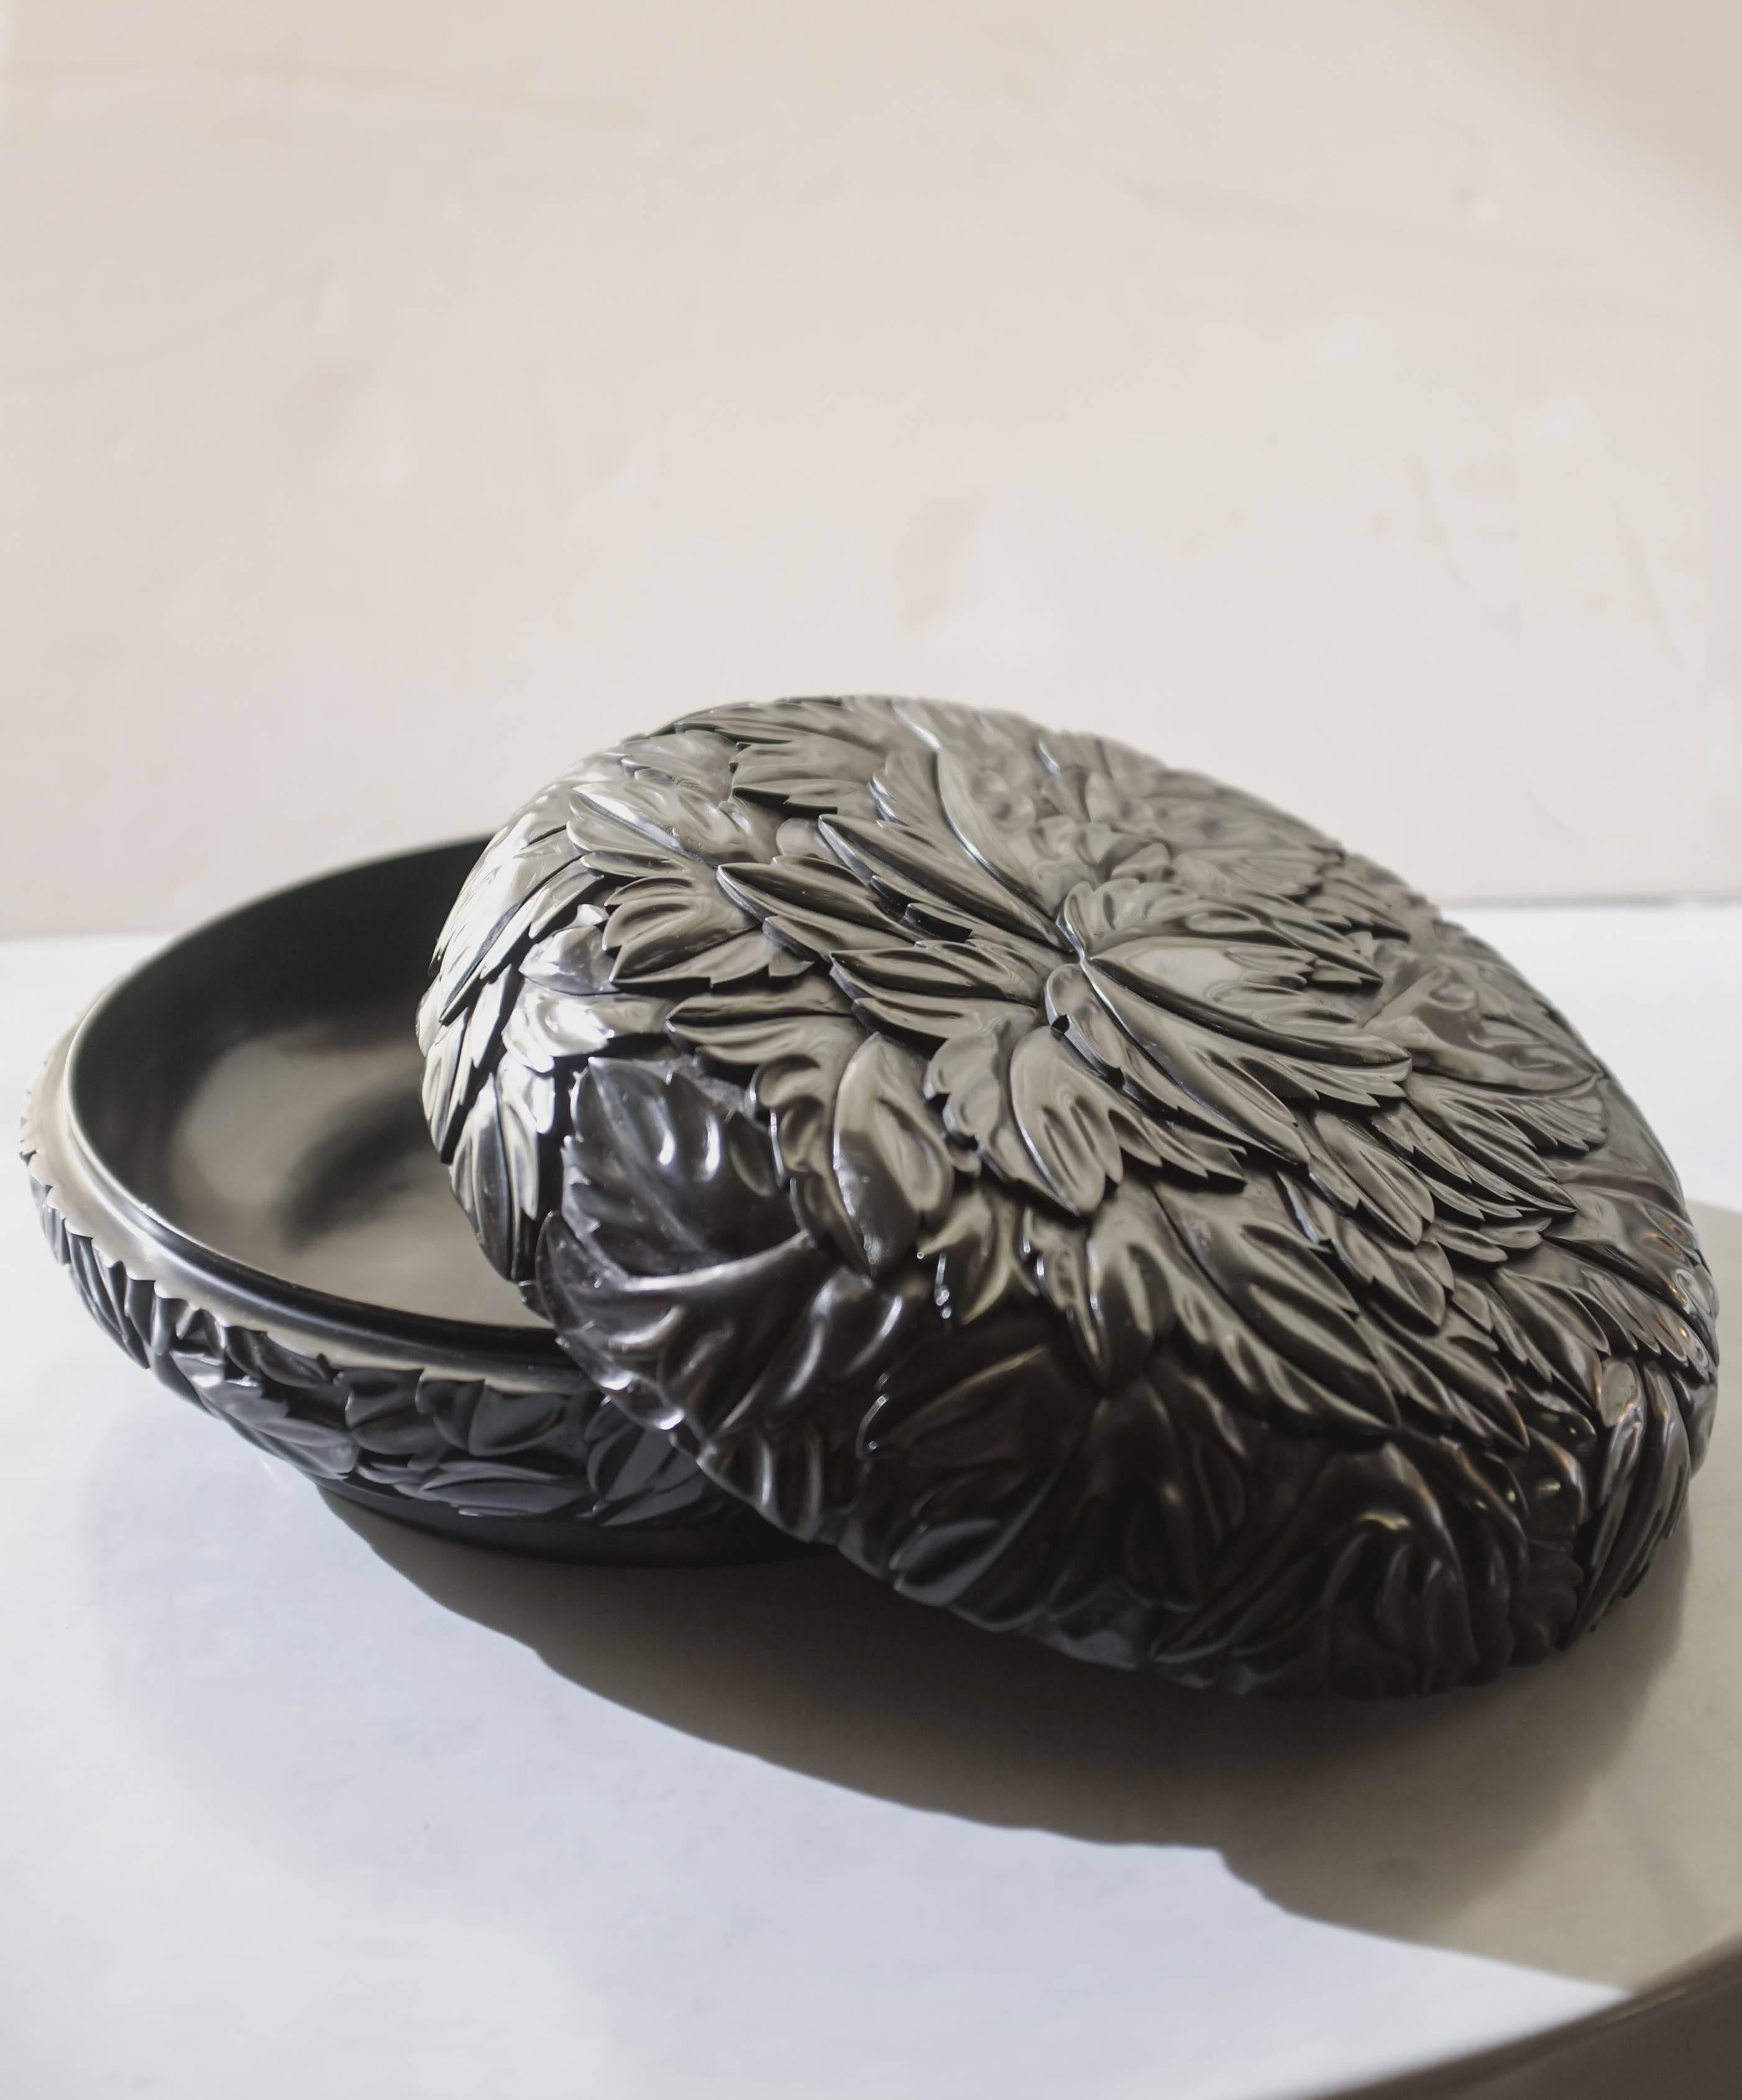 Round leaf design box
Black lacquer
Hand-carved
Wood base
Limited edition
In stock.

Lacquer is a technique that dates back to the Shang dynasty, circa 1600-1100 B.C. These pieces are made with at least 60 coats of organic lacquer. Each layer of